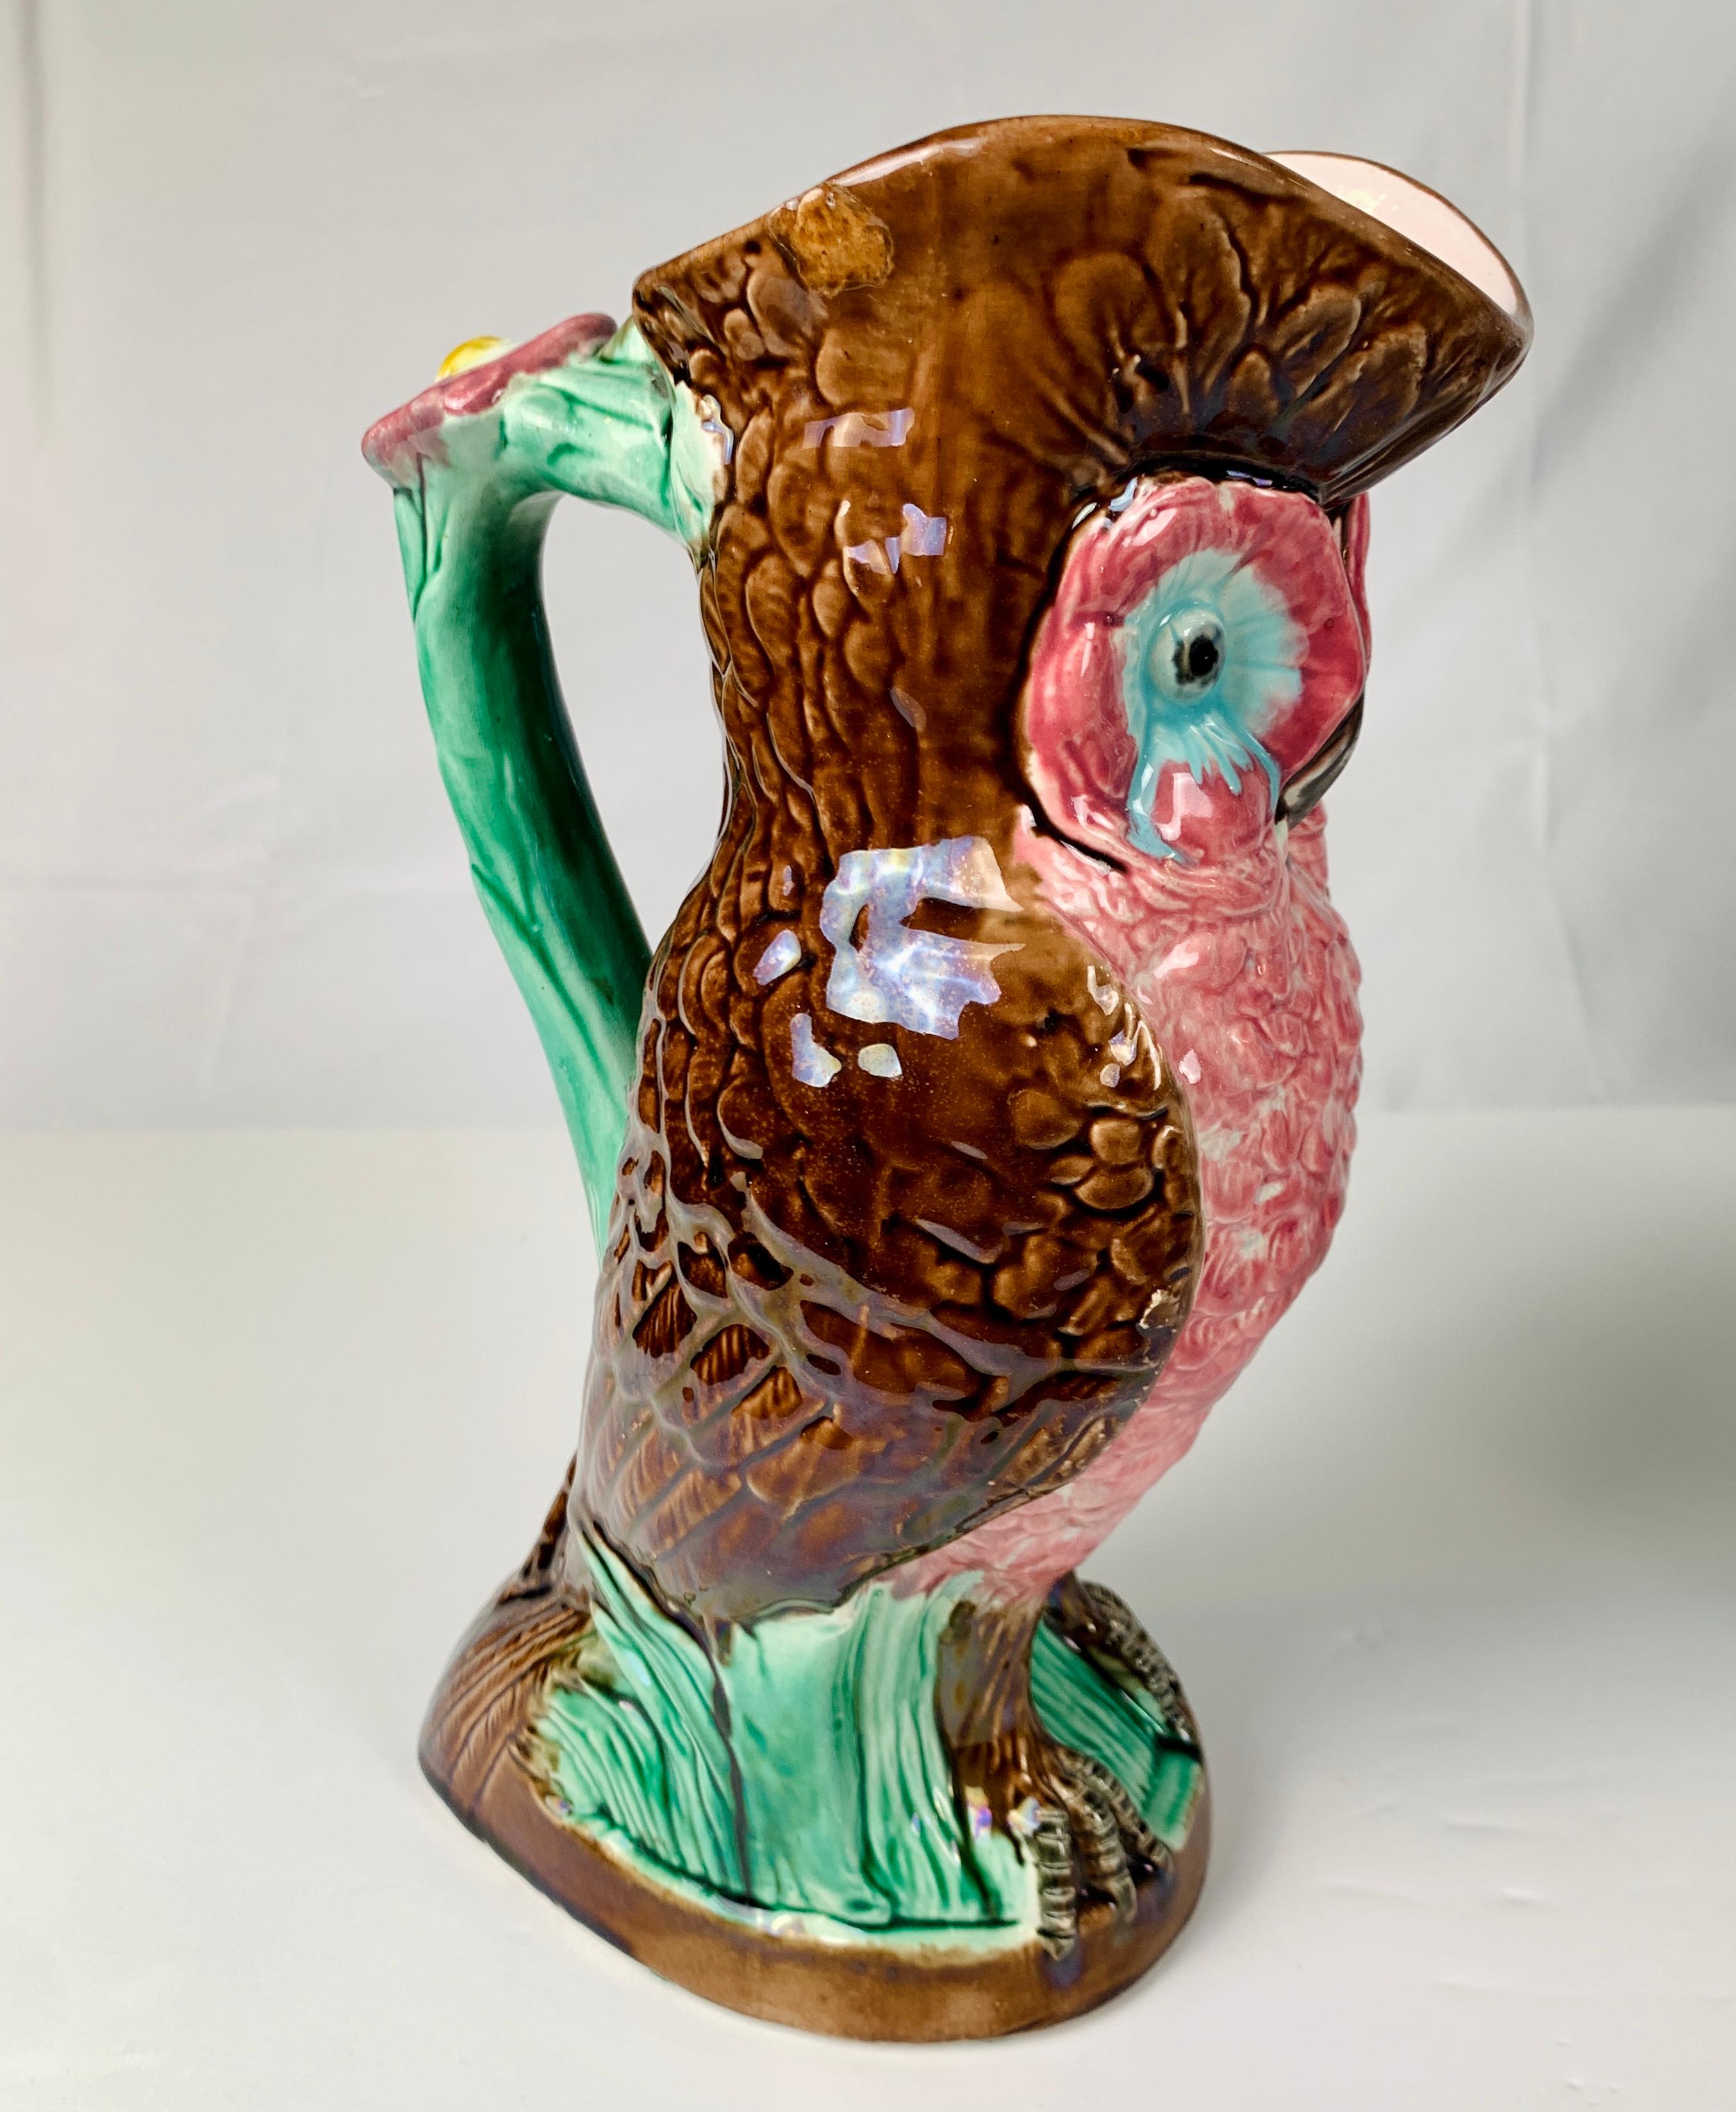 A marvelous Majolica owl made in the Art Nouveau style in England circa 1890. 
The figure is painted in bright enamels with stunning pink breast feathers, turquoise eyes, and deep brown feathers on the sides and back. 
The owl stands on a twisting